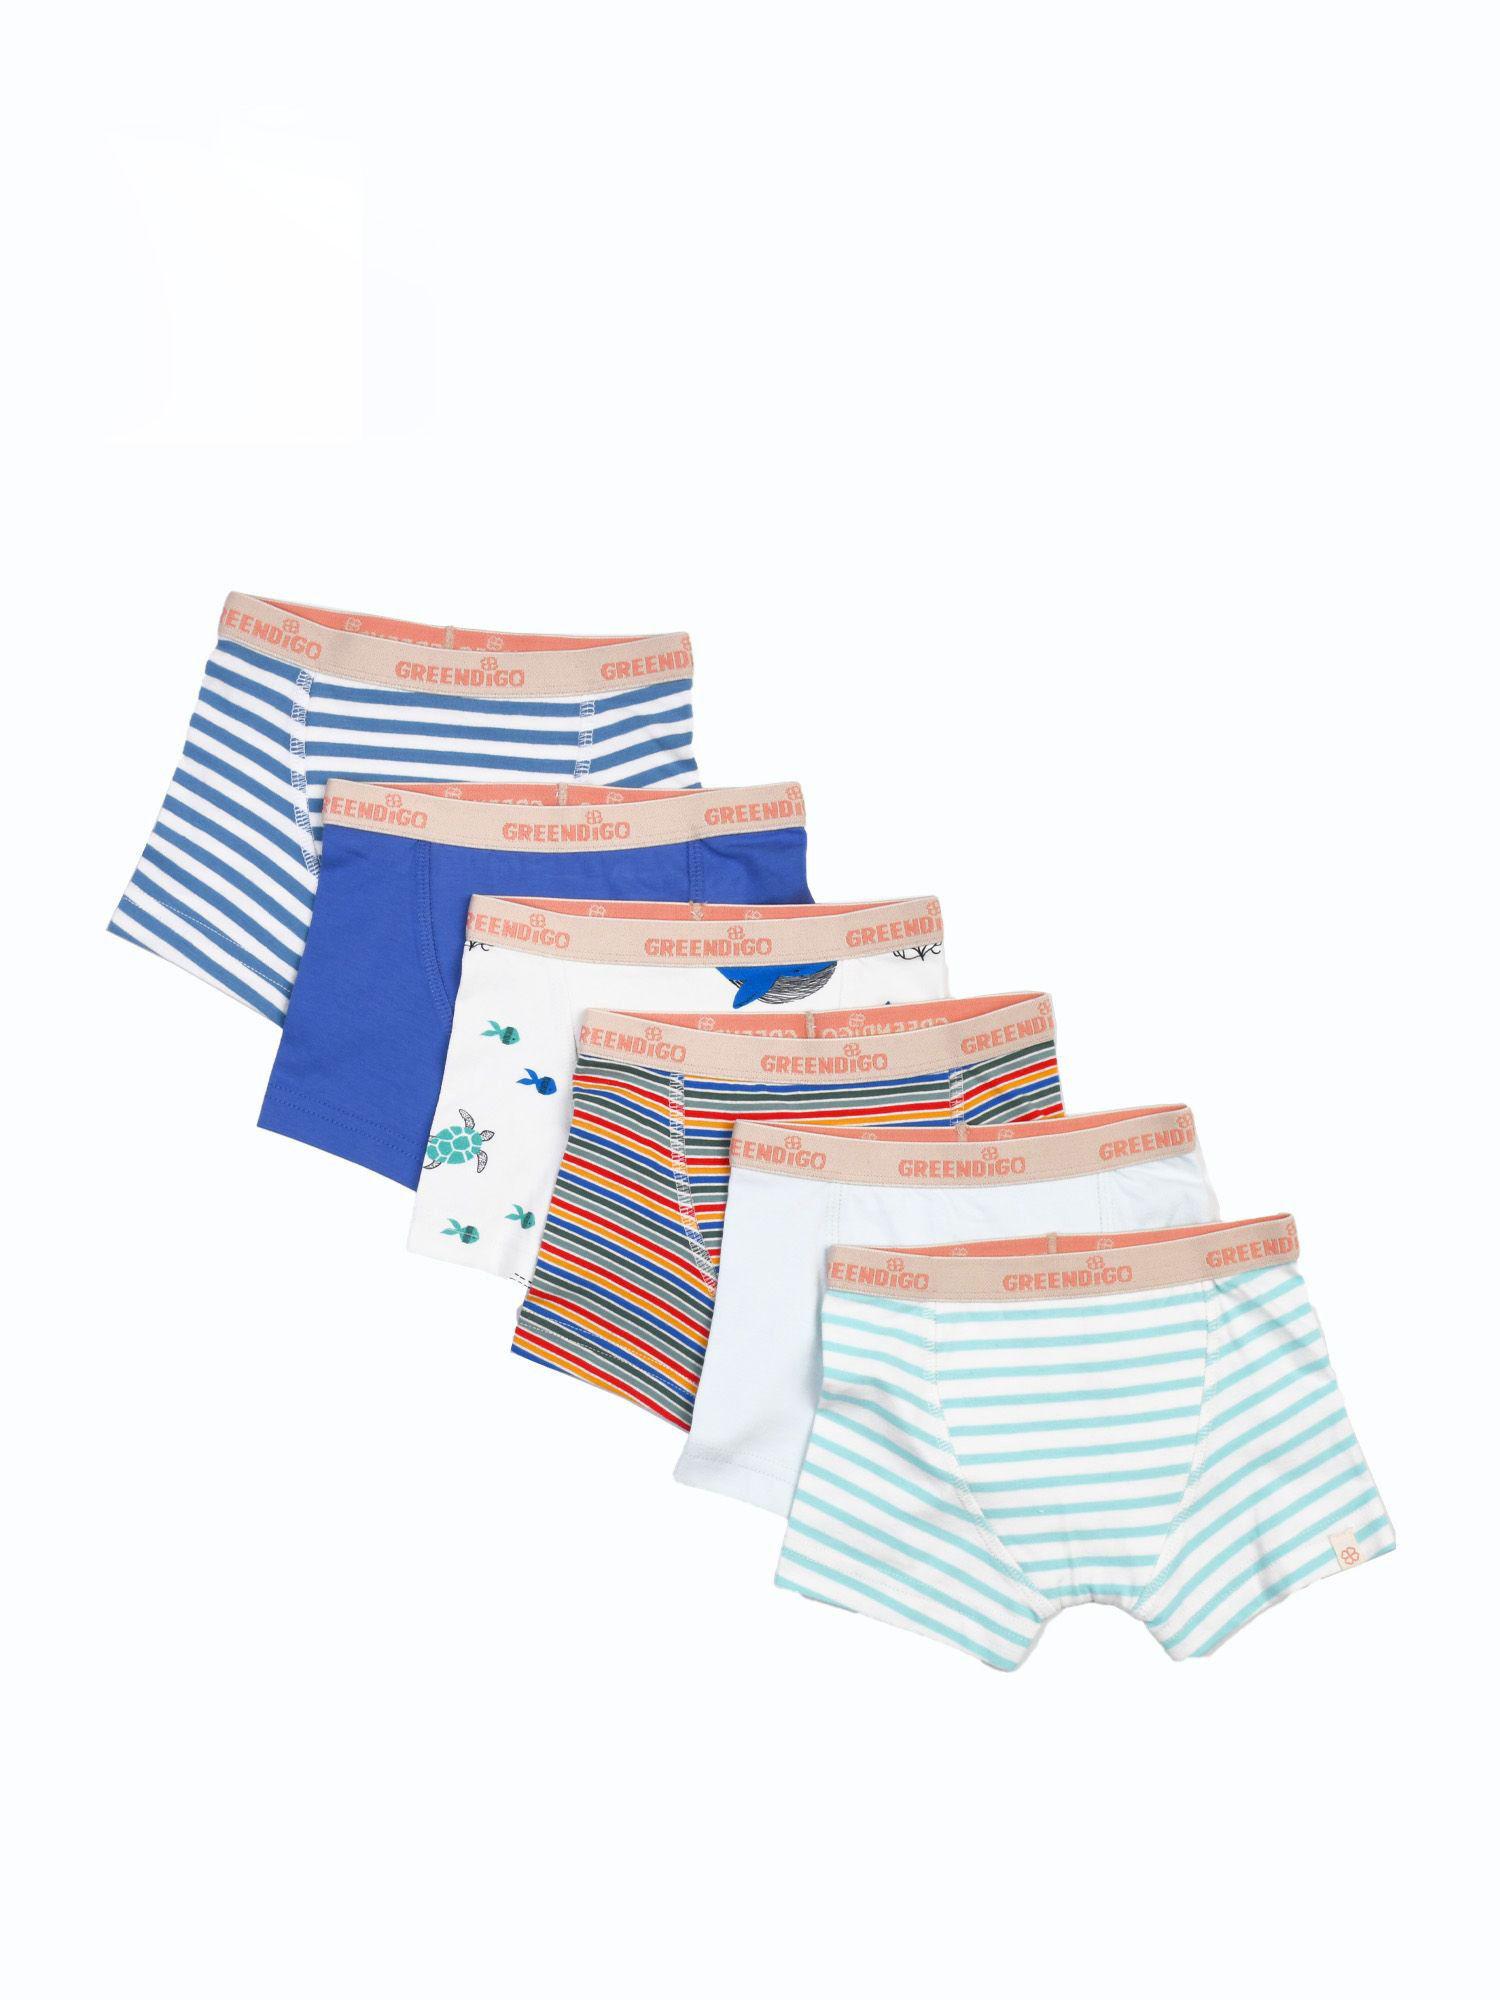 organic-cotton-boys-printed-briefs-(pack-of-6)